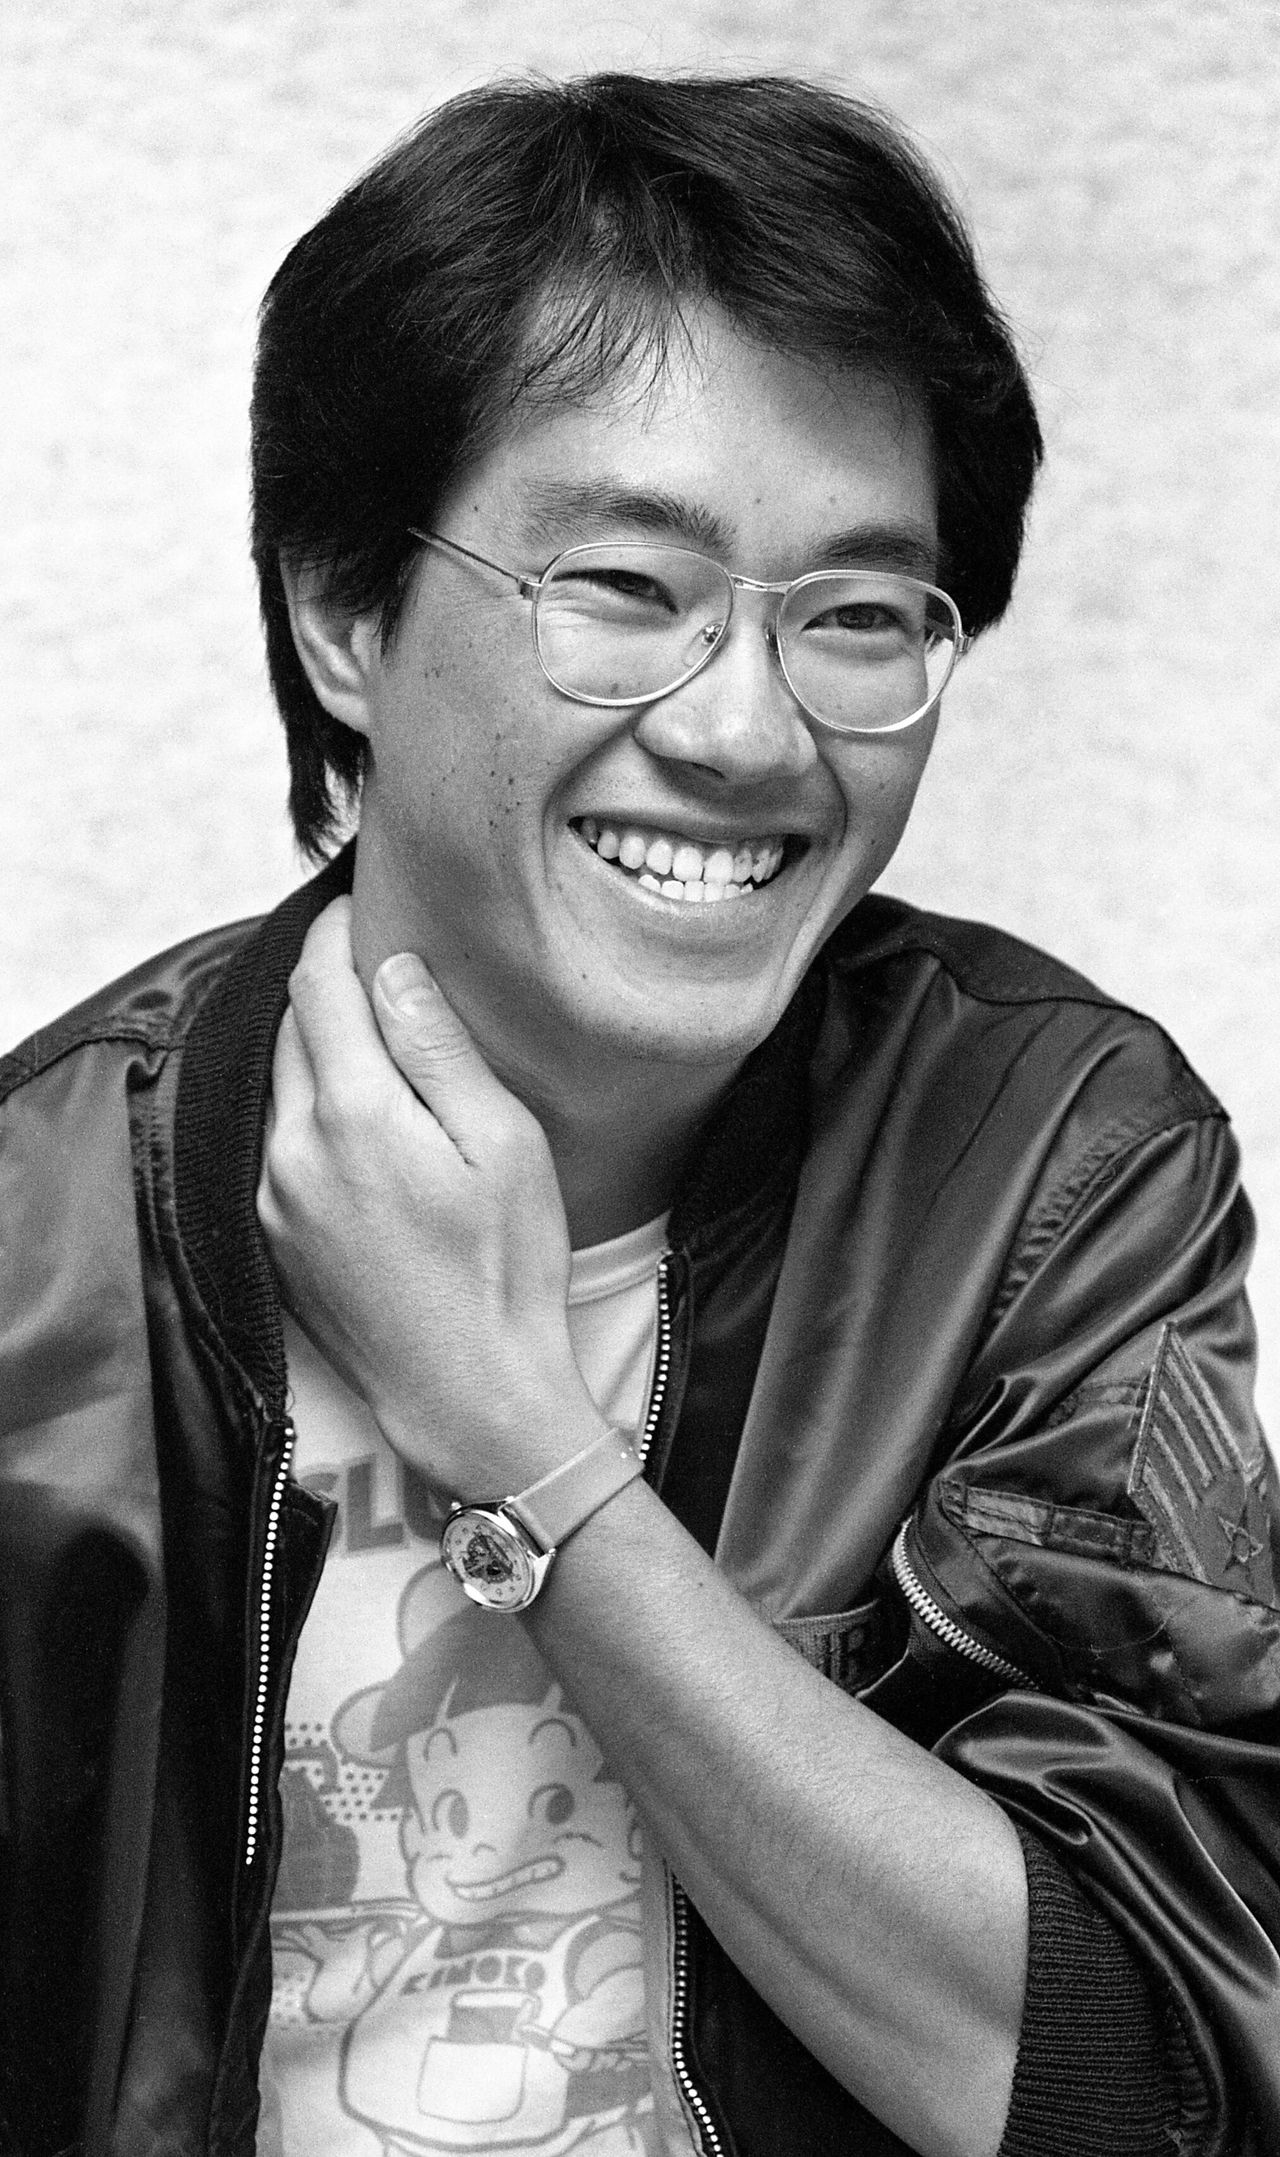 Akira Toriyama passes away at the age of sixty-eight. He was the creator of the famous Dragon Ball series